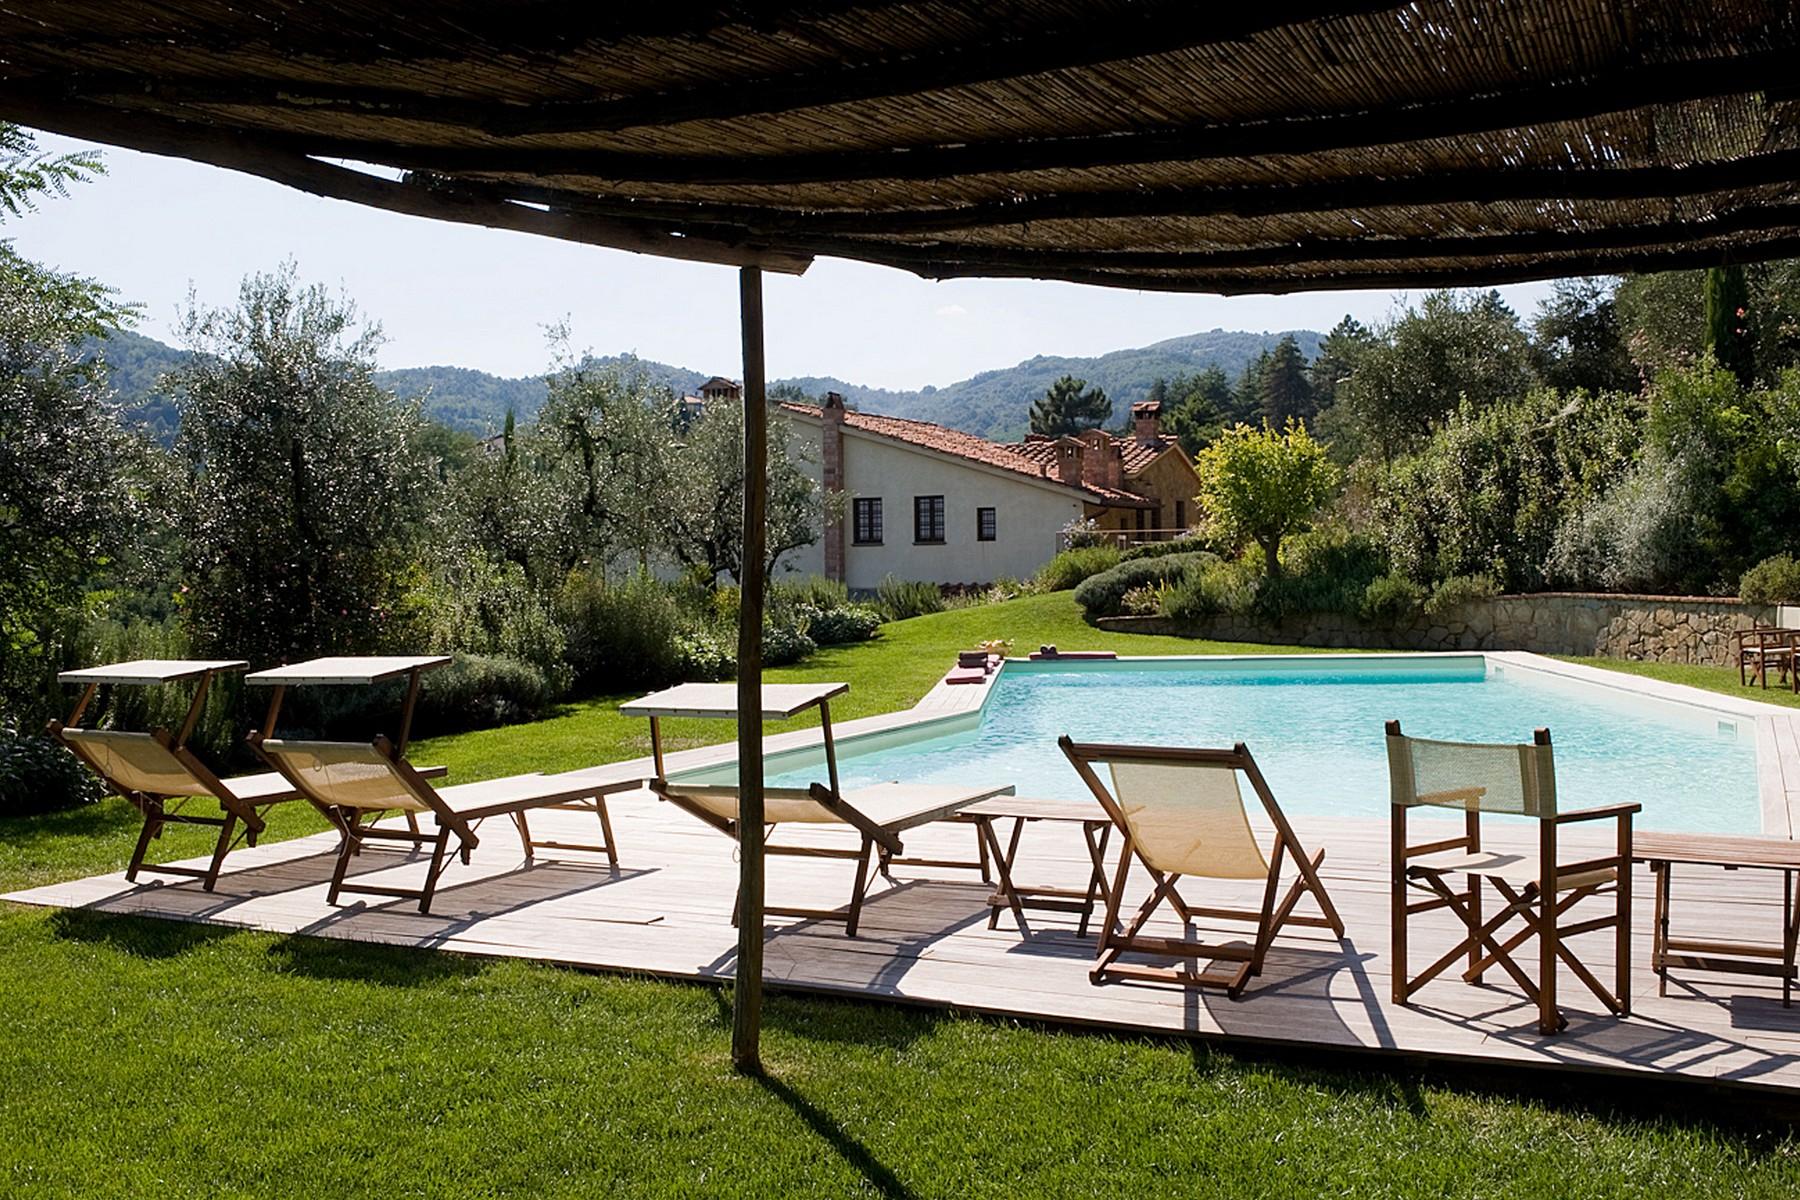 Farmhouse for sale in the Tuscan hills - 5